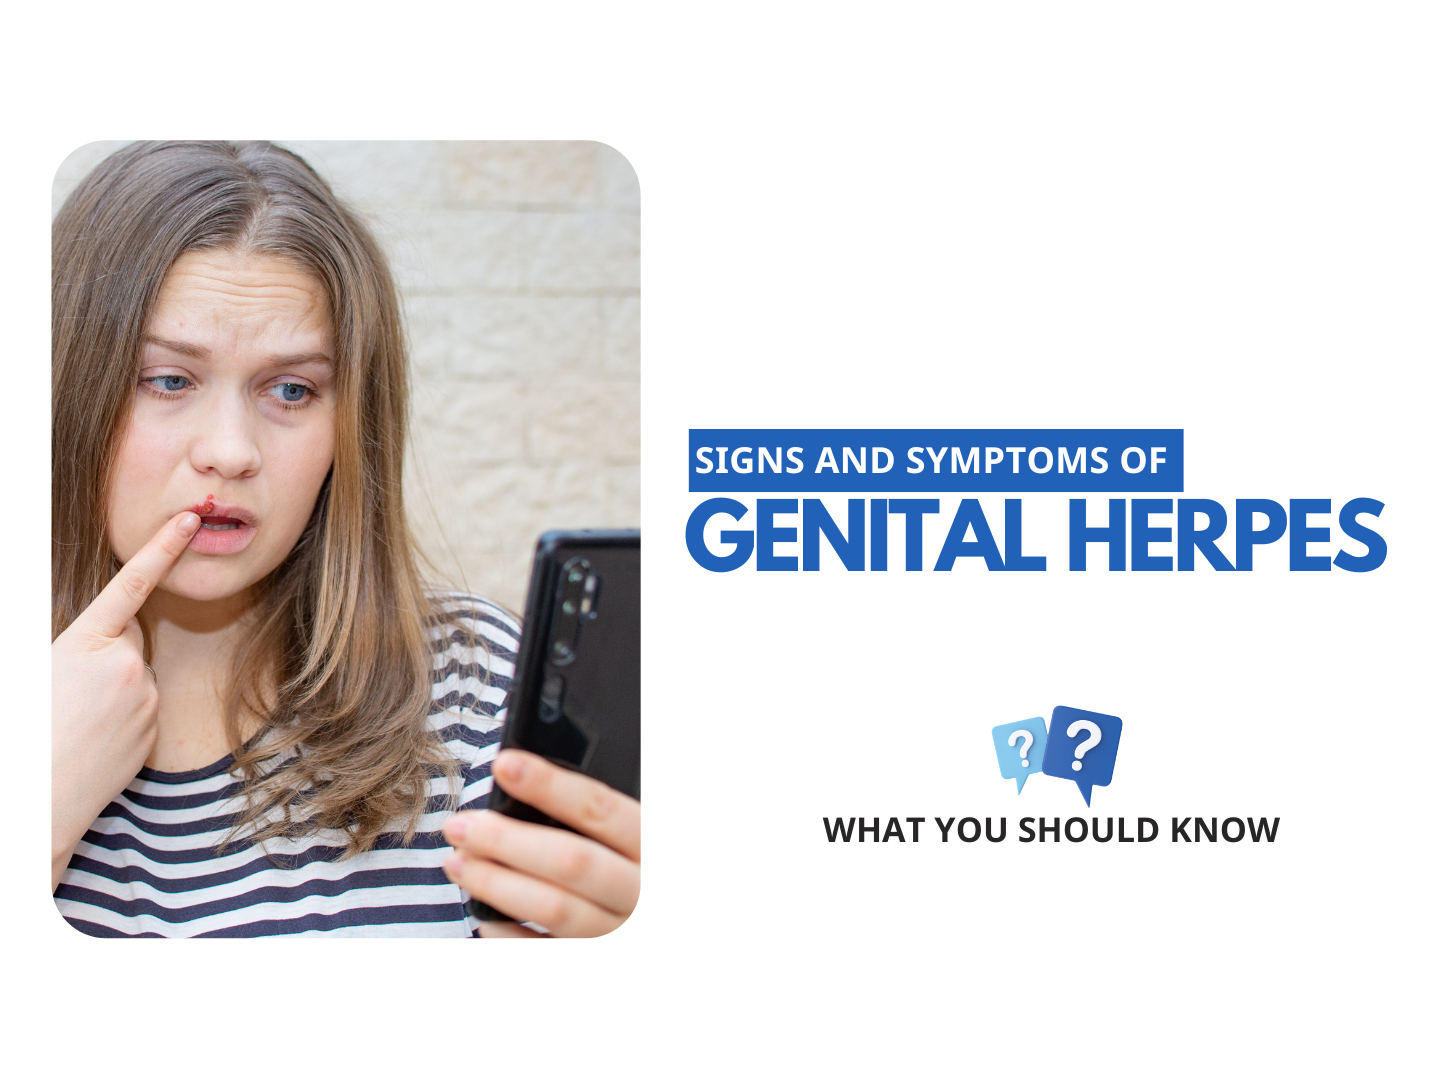 Signs and Symptoms of Genital Herpes—What You Should Know